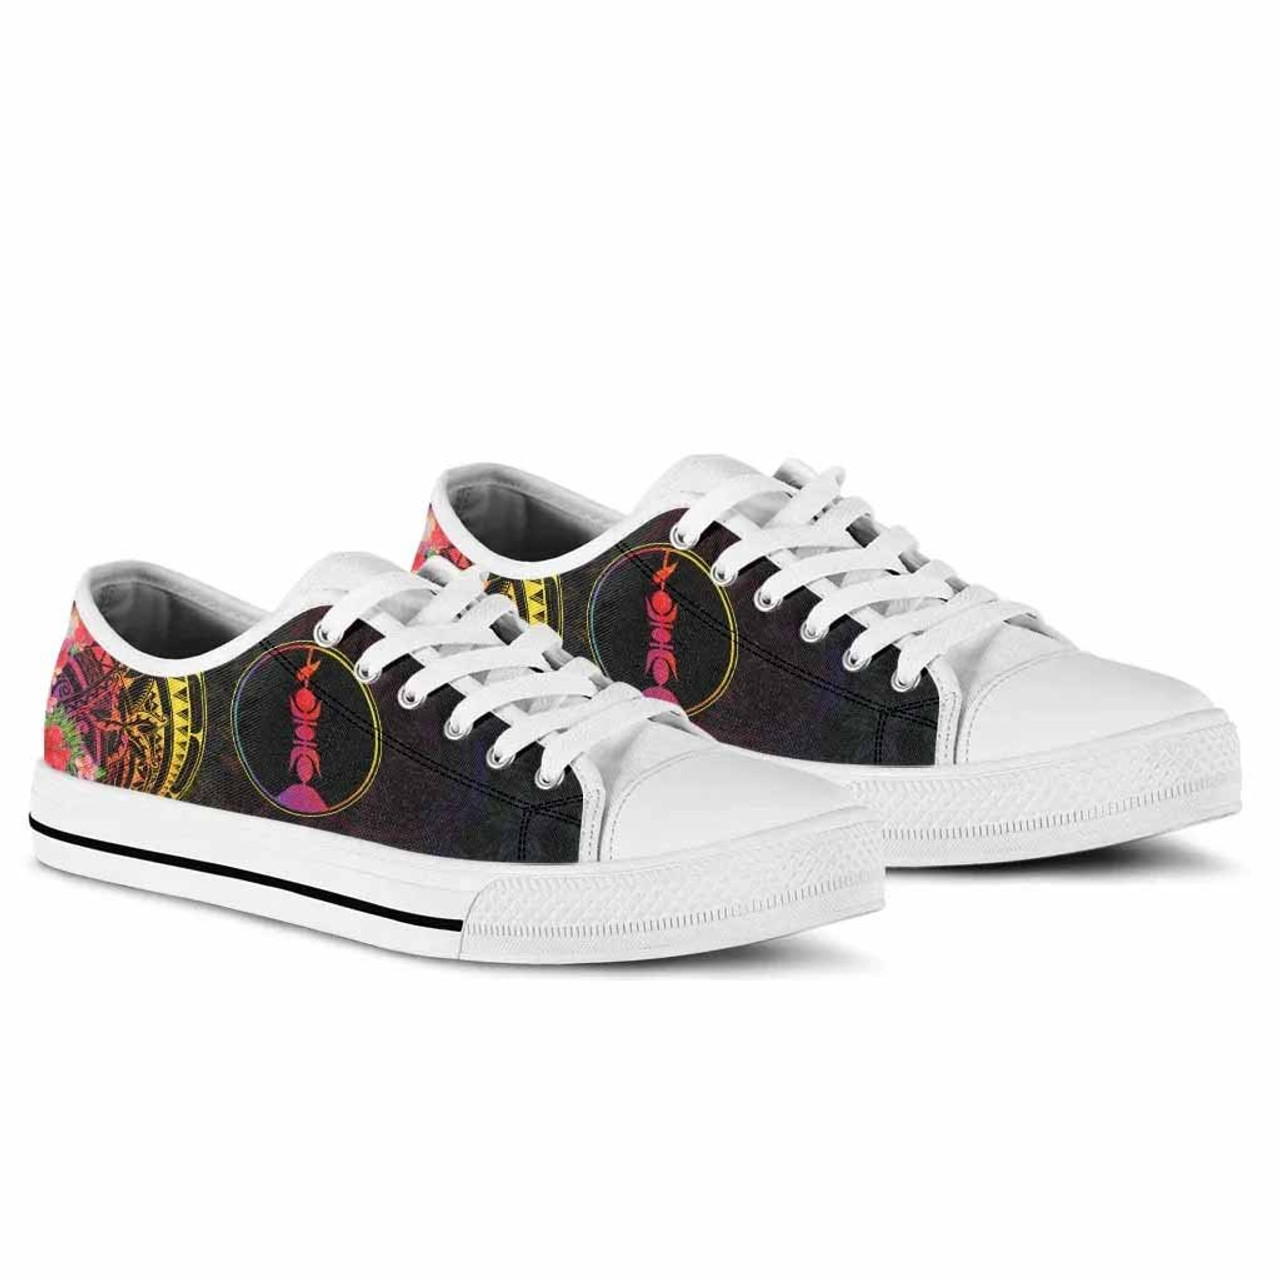 New Caledonia Low Top Shoes - Tropical Hippie Style 5